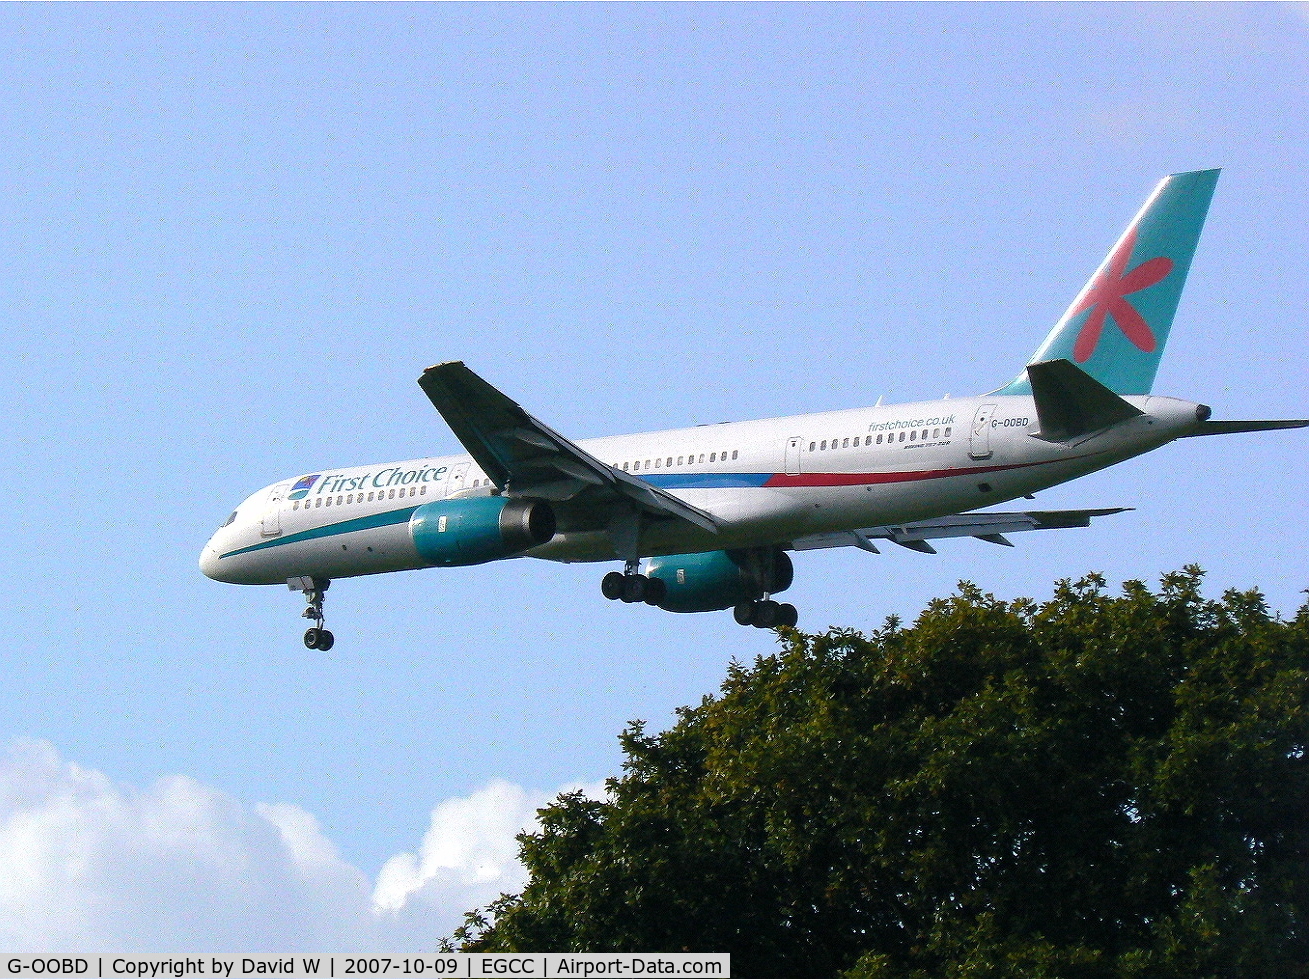 G-OOBD, 2003 Boeing 757-28A C/N 33099, Just about to land at Manchester.